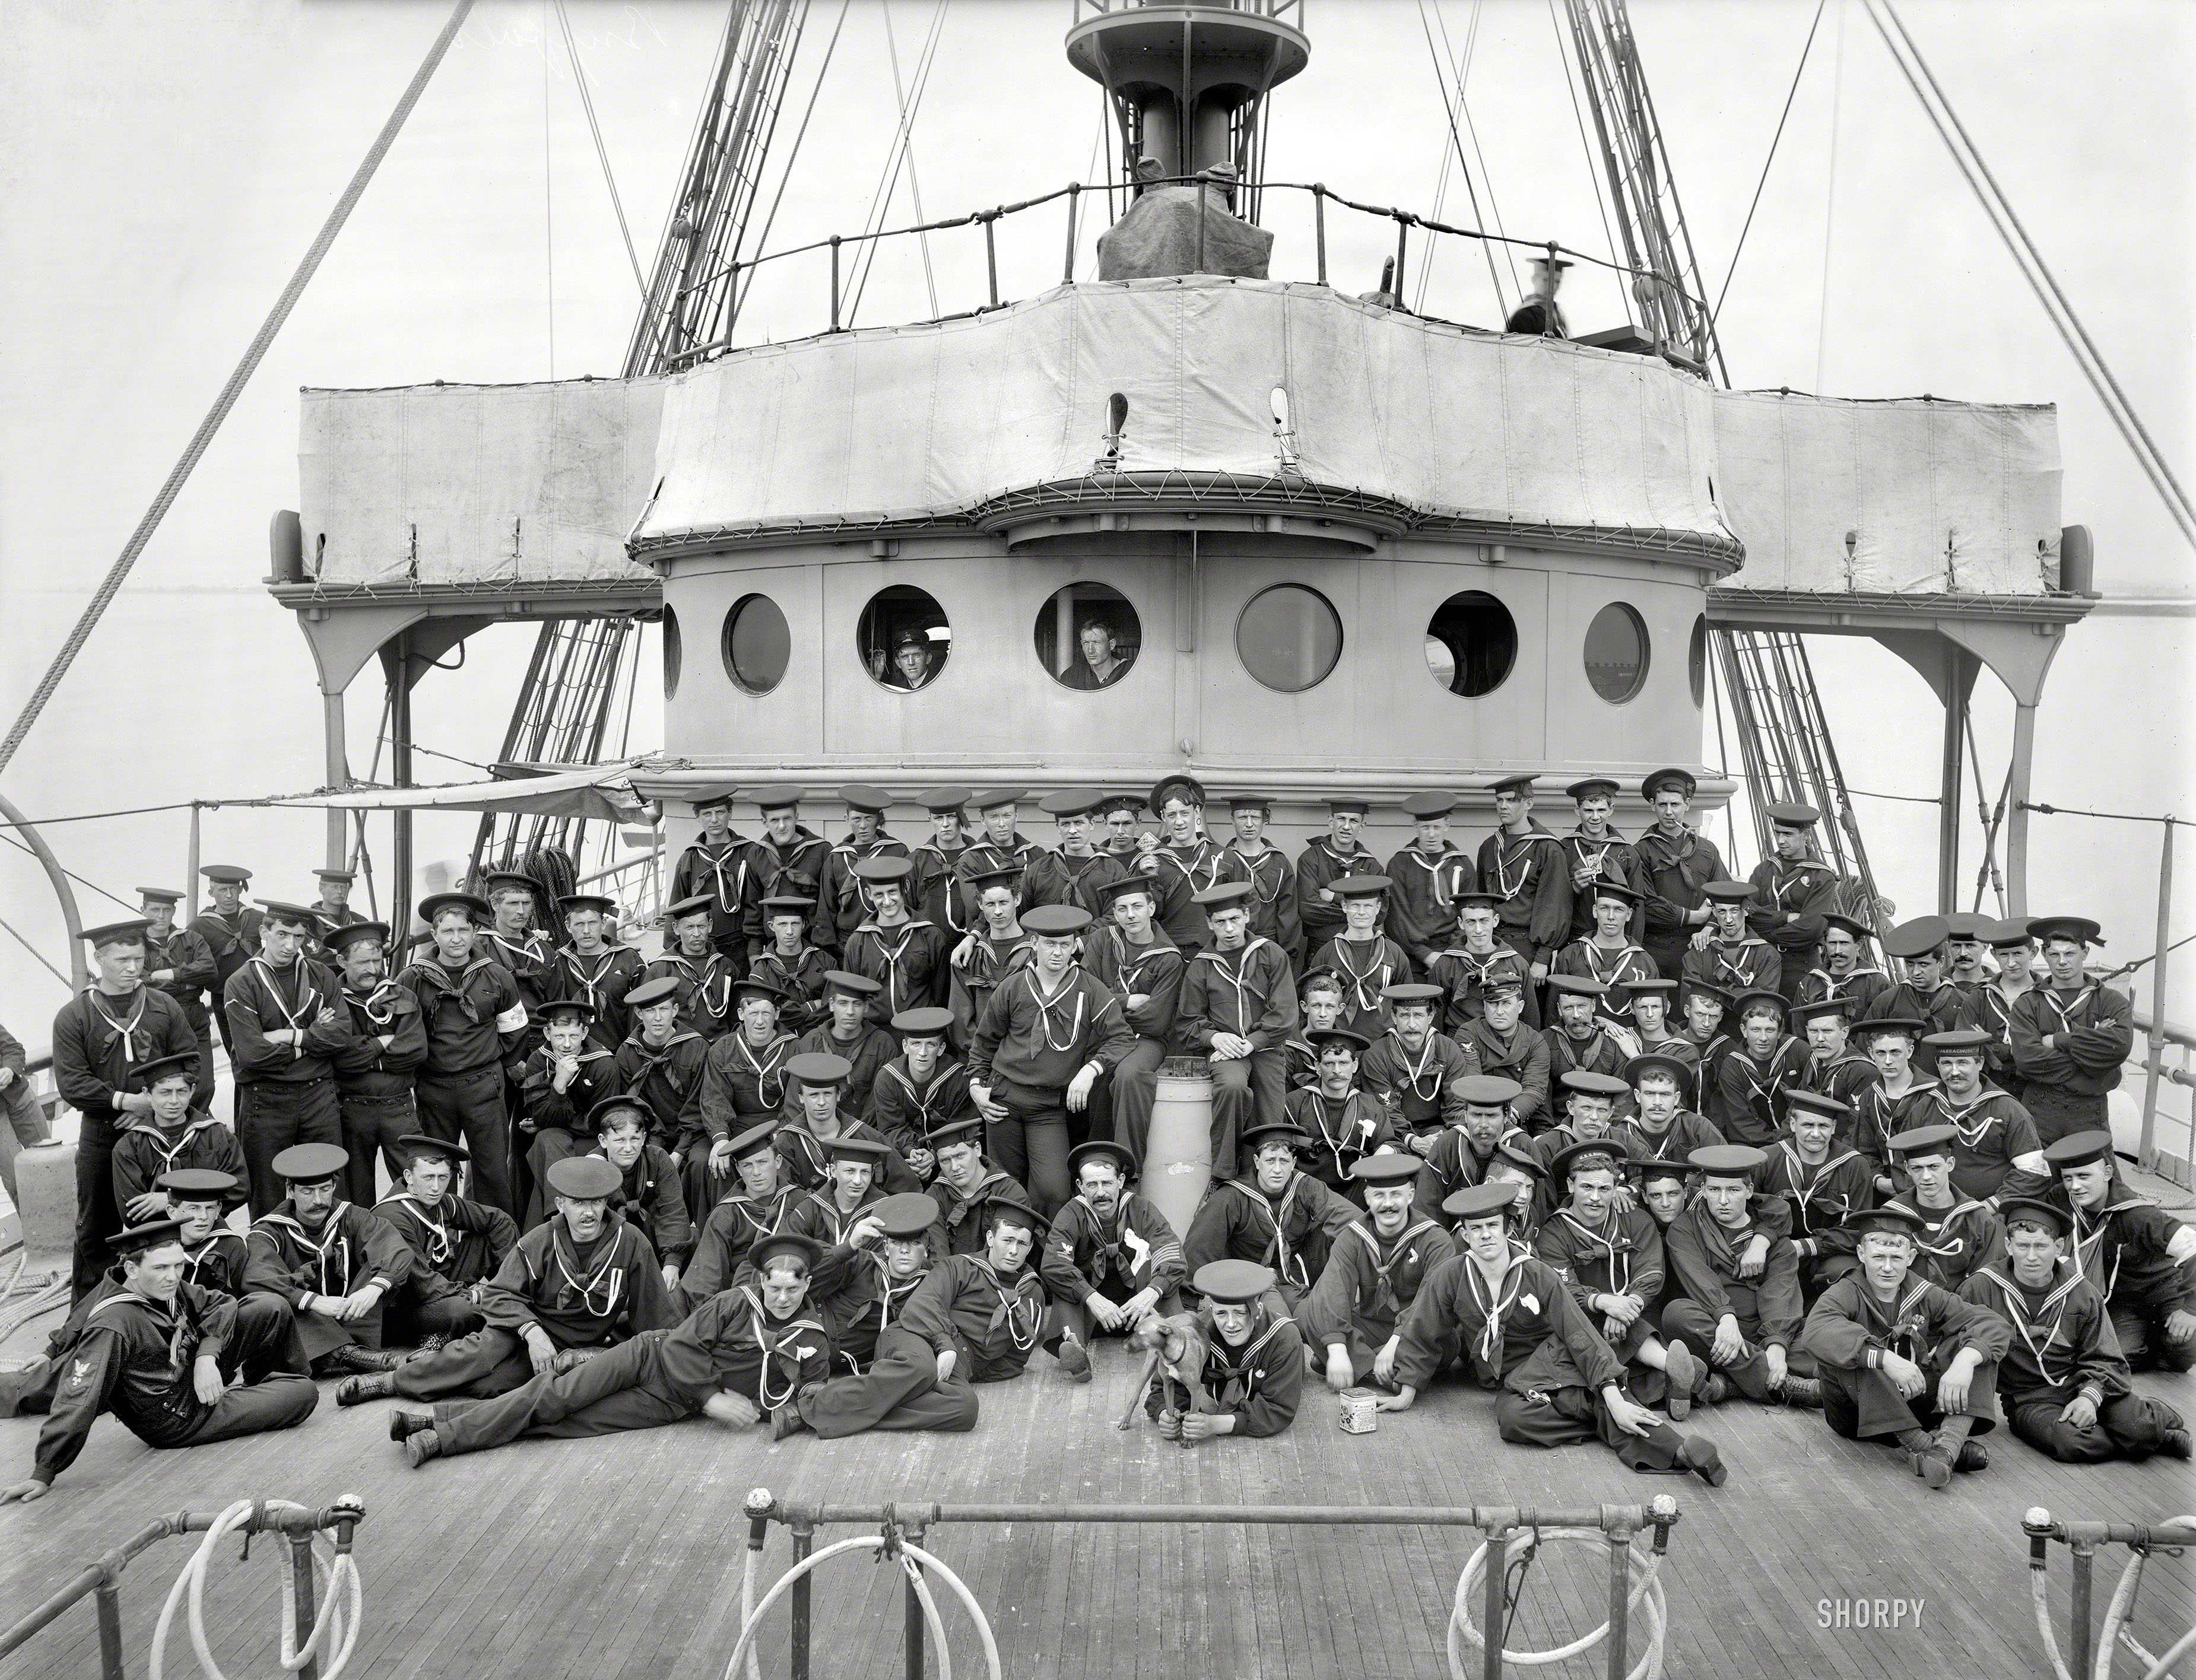 Circa 1900. "U.S.S. Buffalo, ship's company." A certain amount of mugging for the camera here, as well as various props and a canine mascot. 8x10 inch dry plate glass negative by Edward Hart, Detroit Publishing Company. View full size.